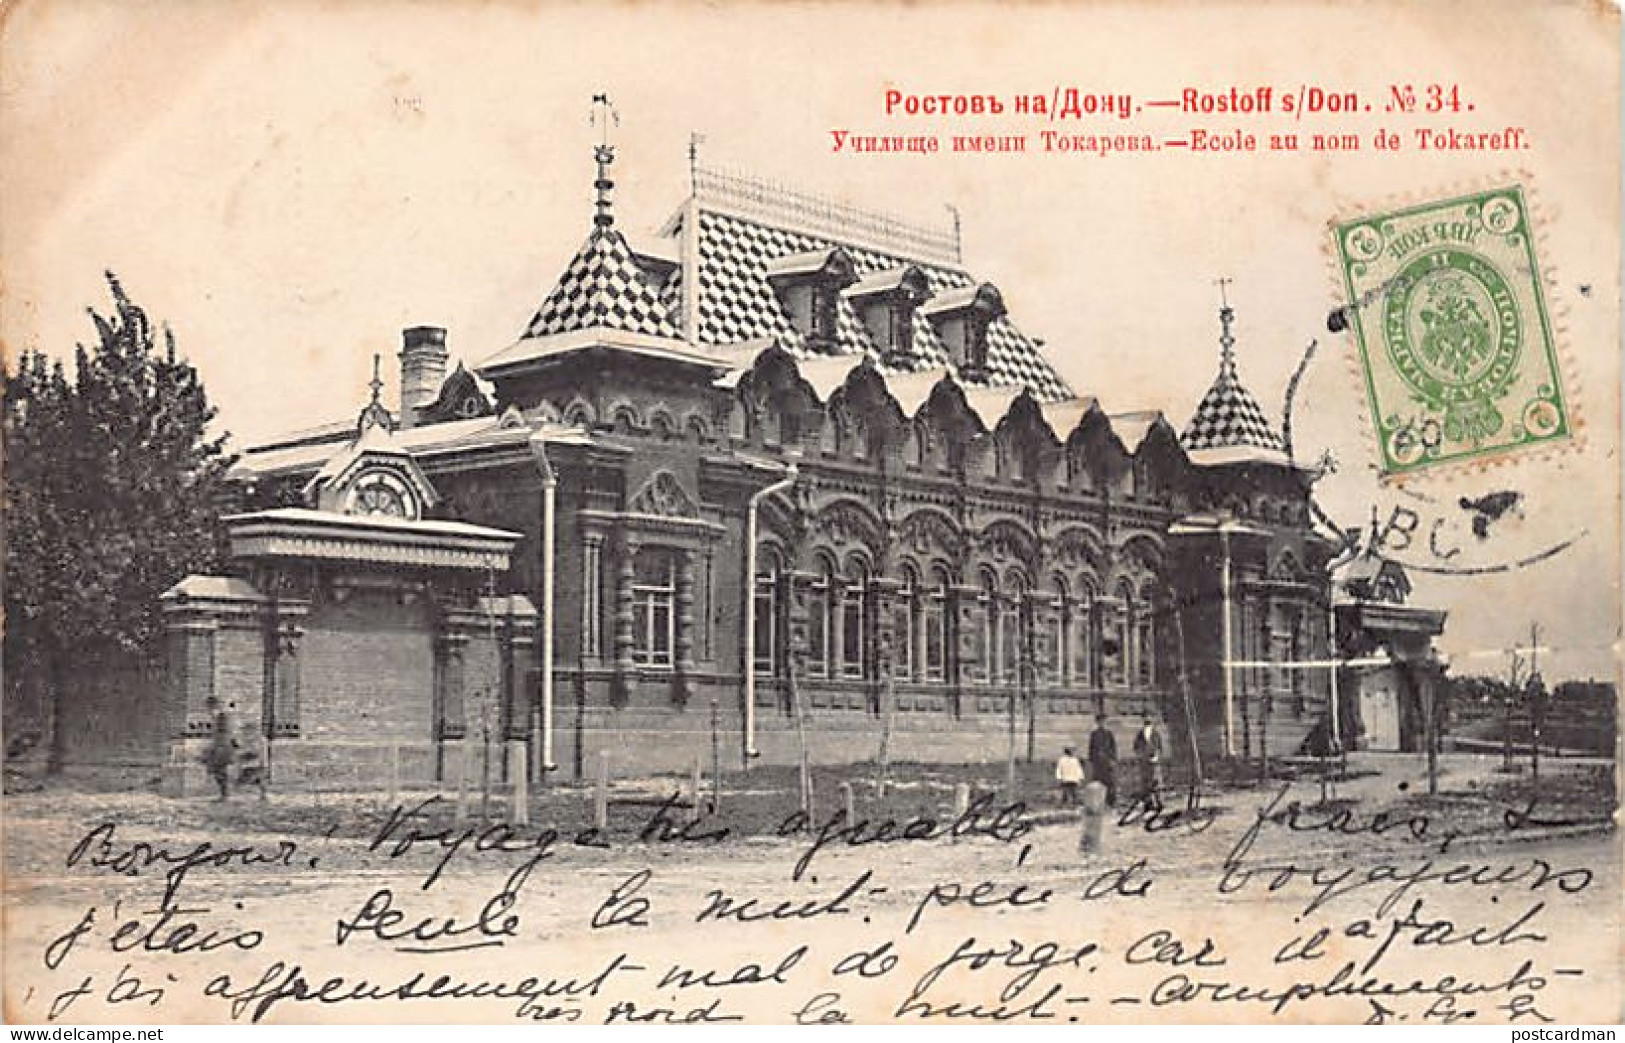 Russia - ROSTOV-ON-DON - Tokarev School - Publ. Scherer, Nabholz And Co. 34 - Year 1903 - Russia